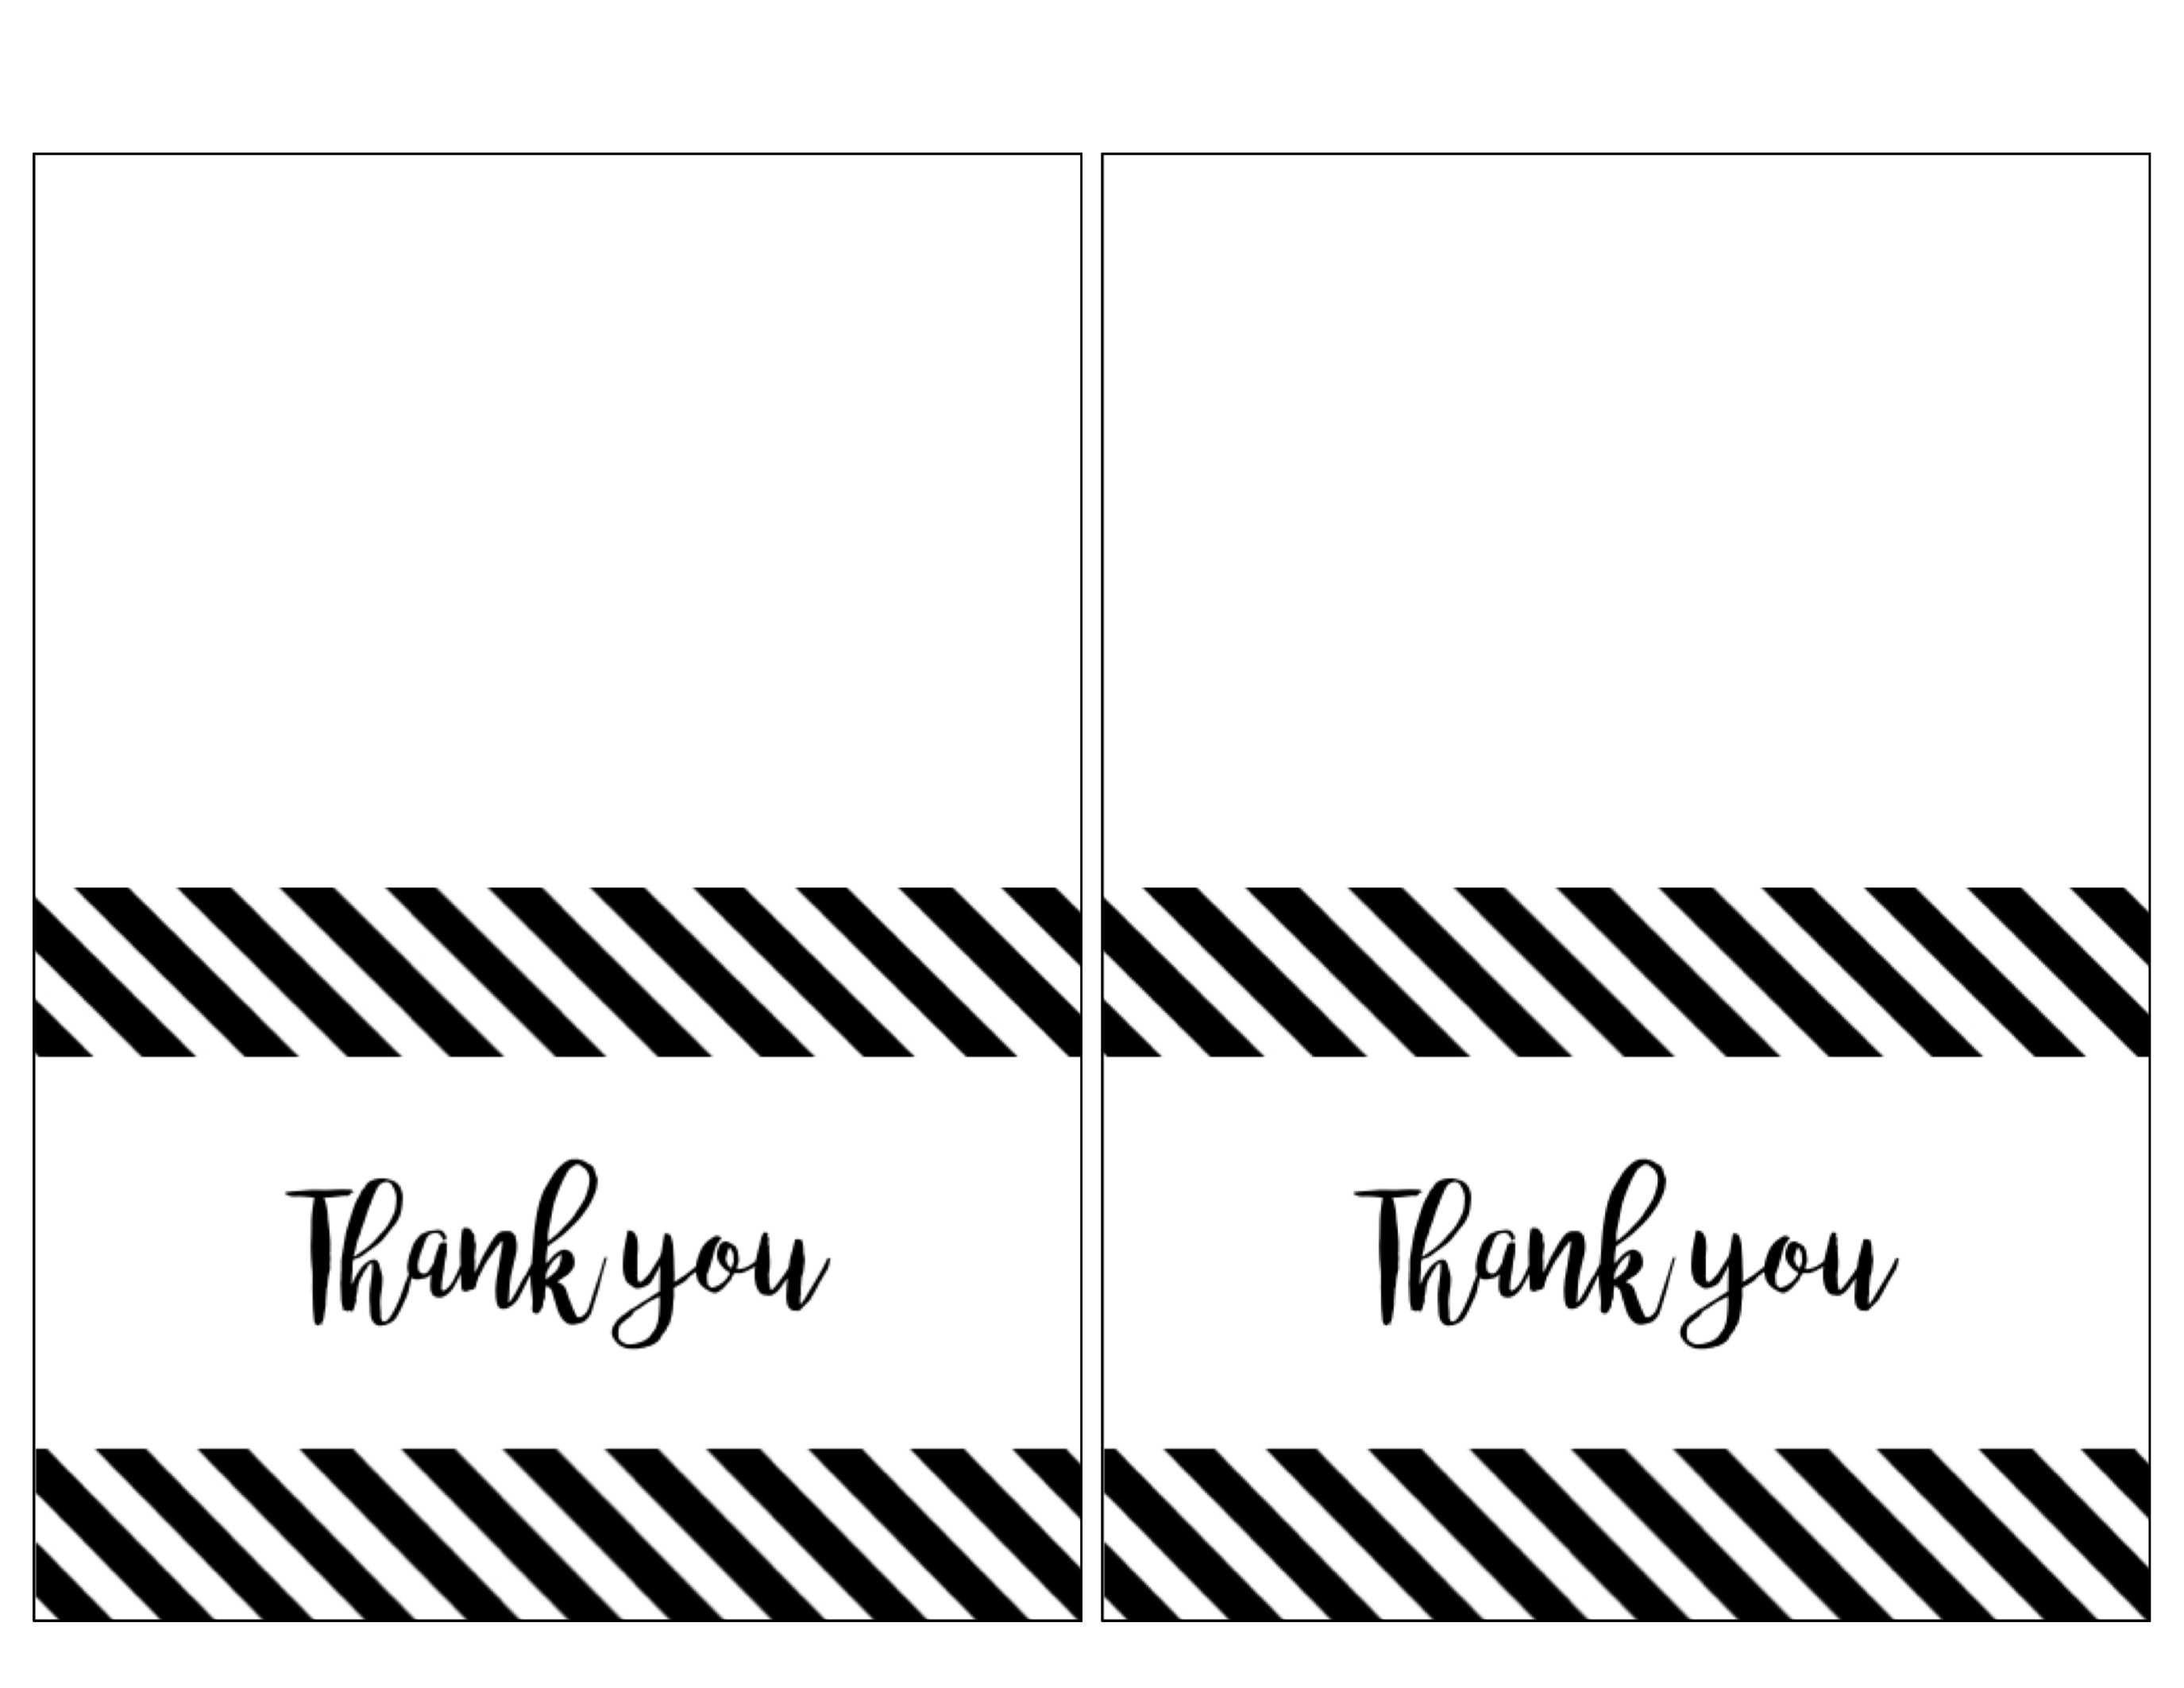 17-customize-our-free-thank-you-card-template-to-print-photo-for-thank